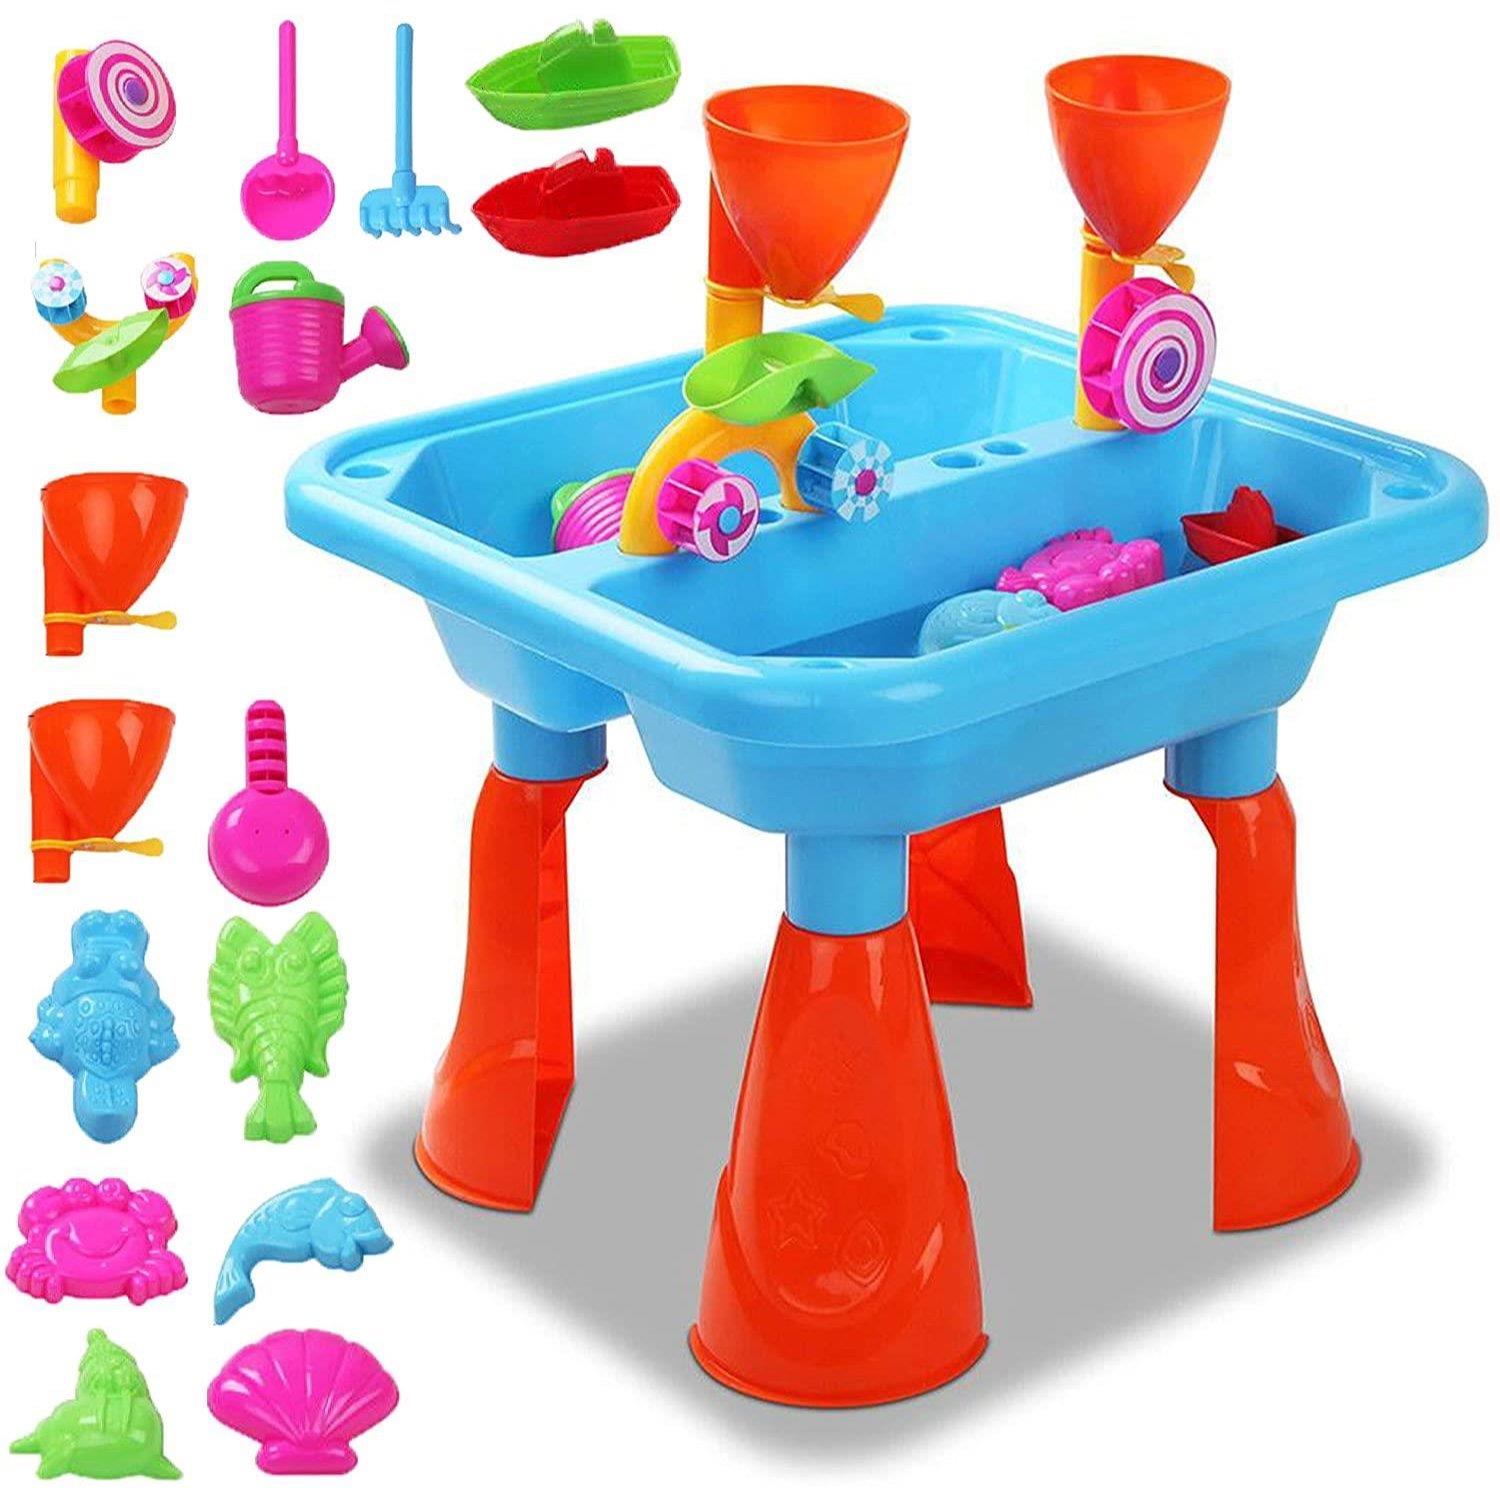 The Magic Toy Shop Toys and Games Blue Sand and Water Table Garden Sandpit Play Set